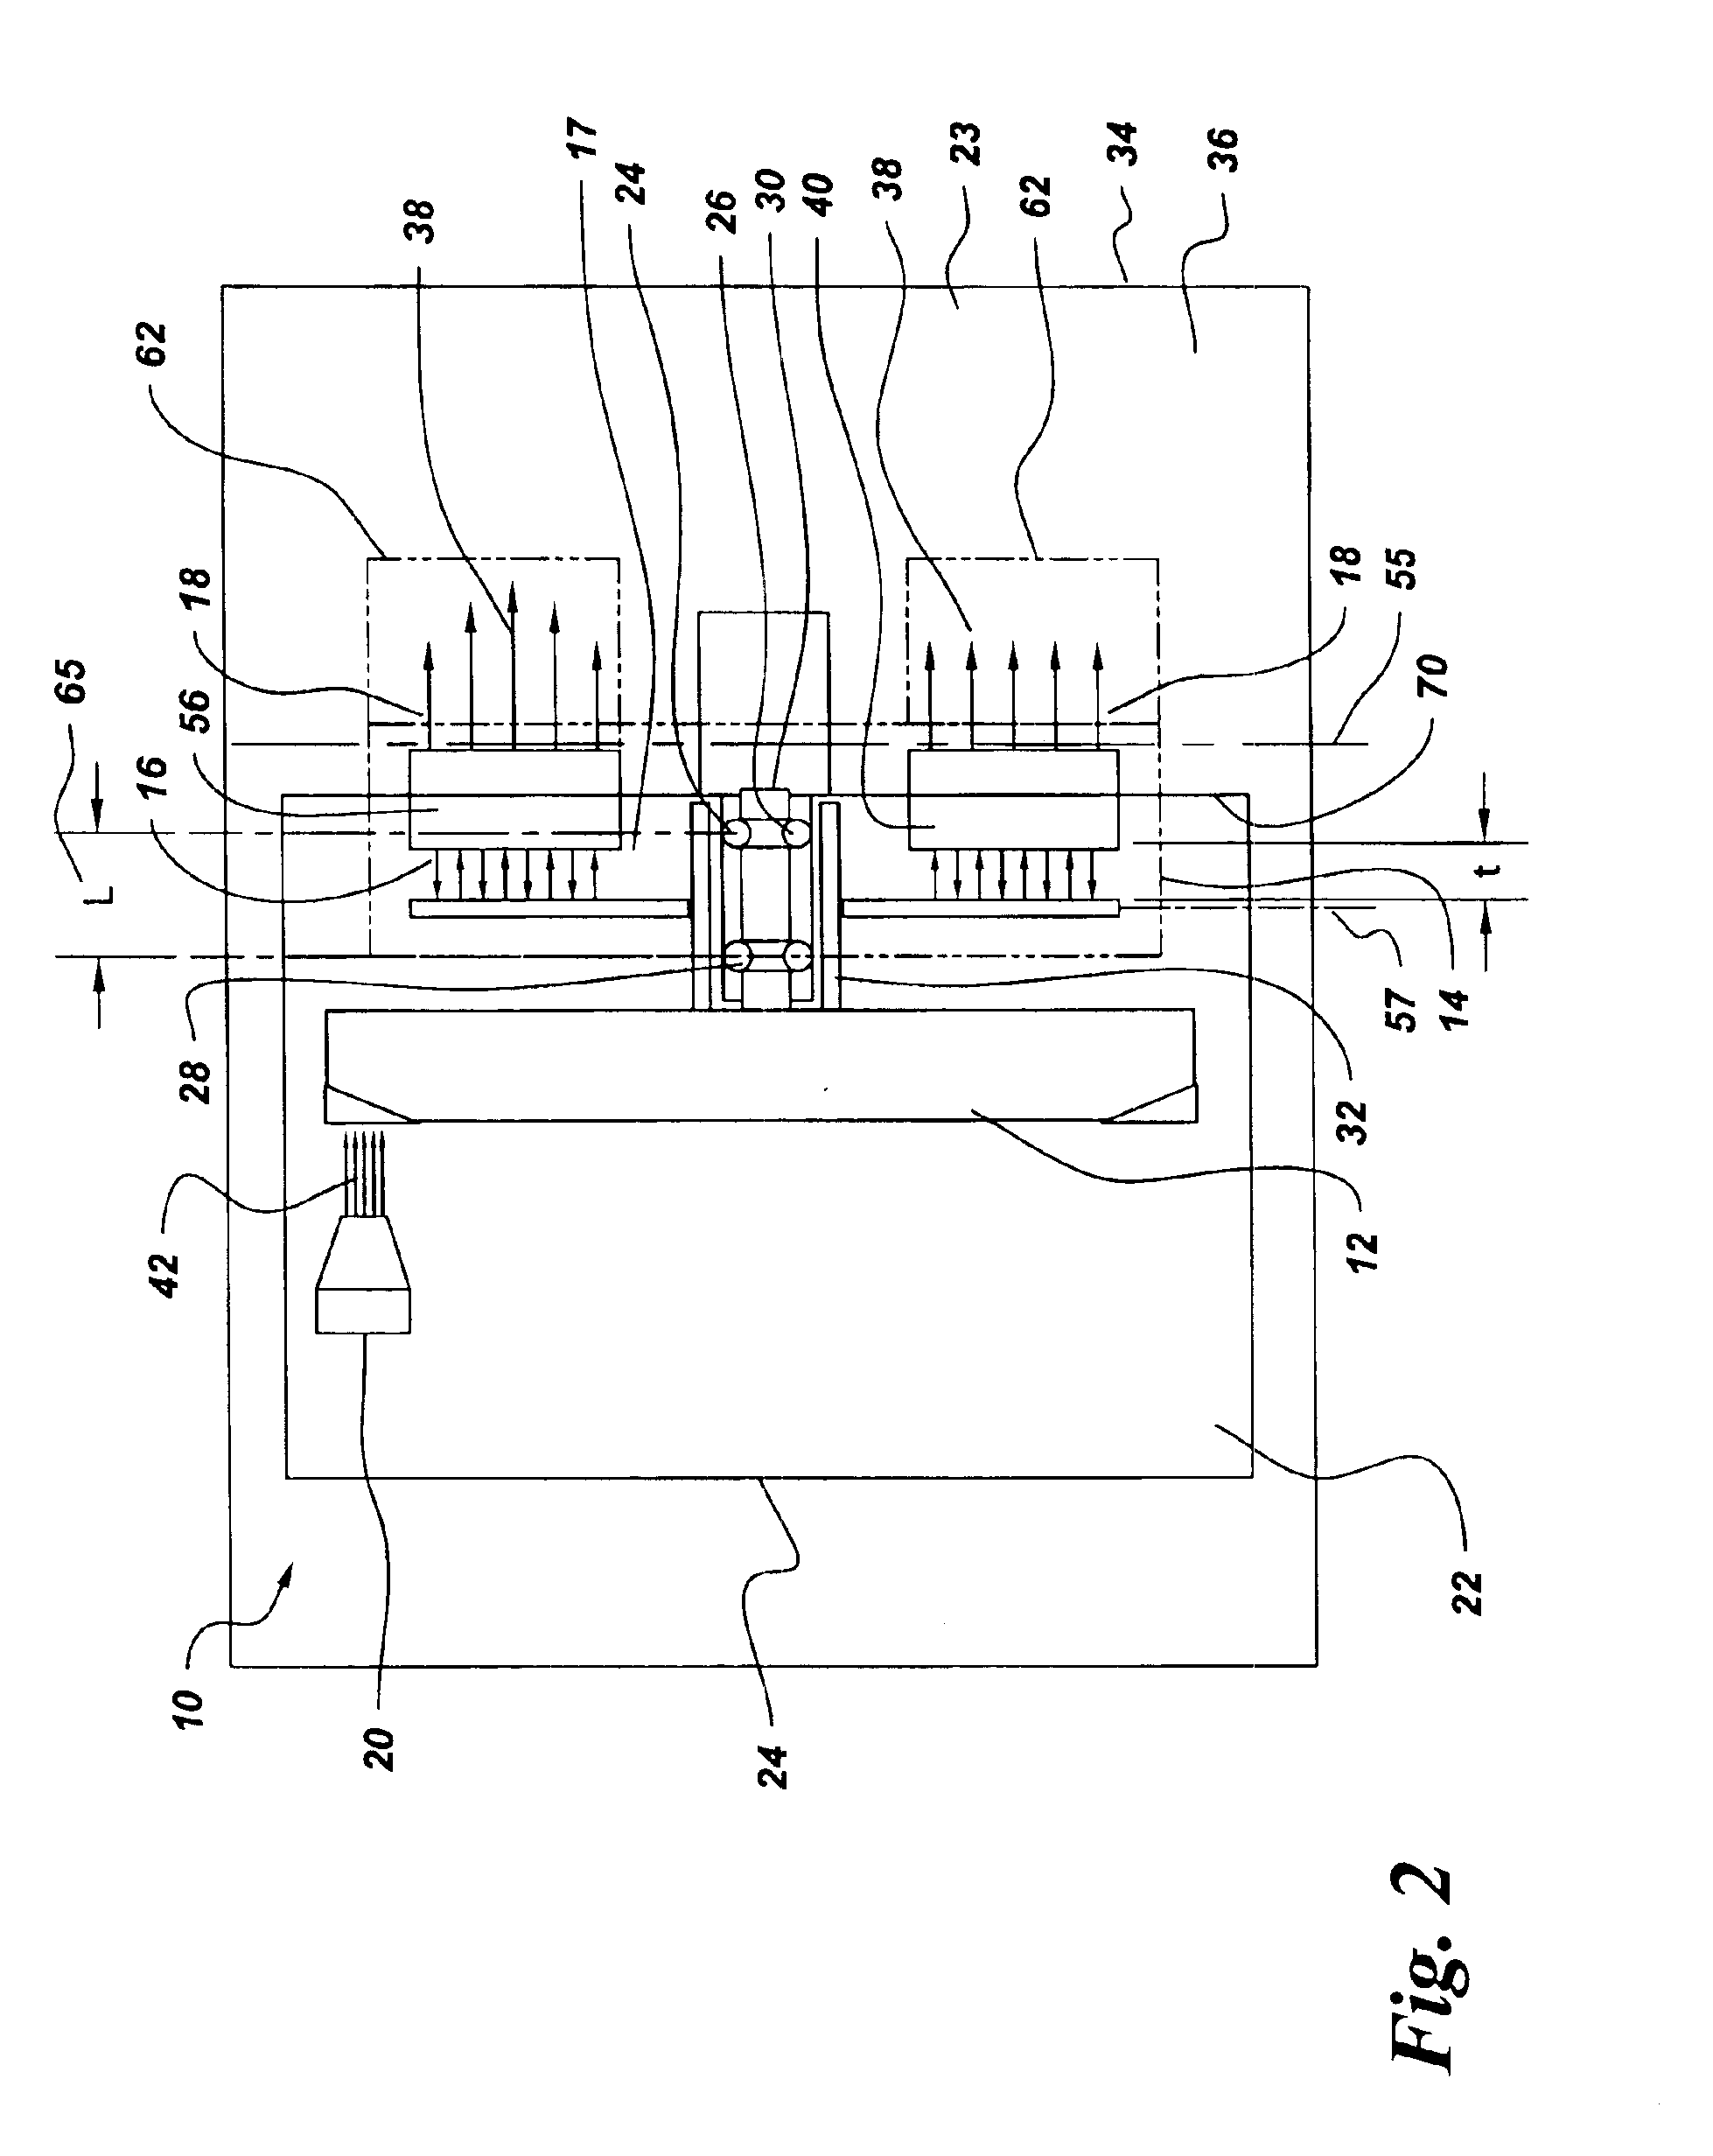 Axial flux motor driven anode target for X-ray tube